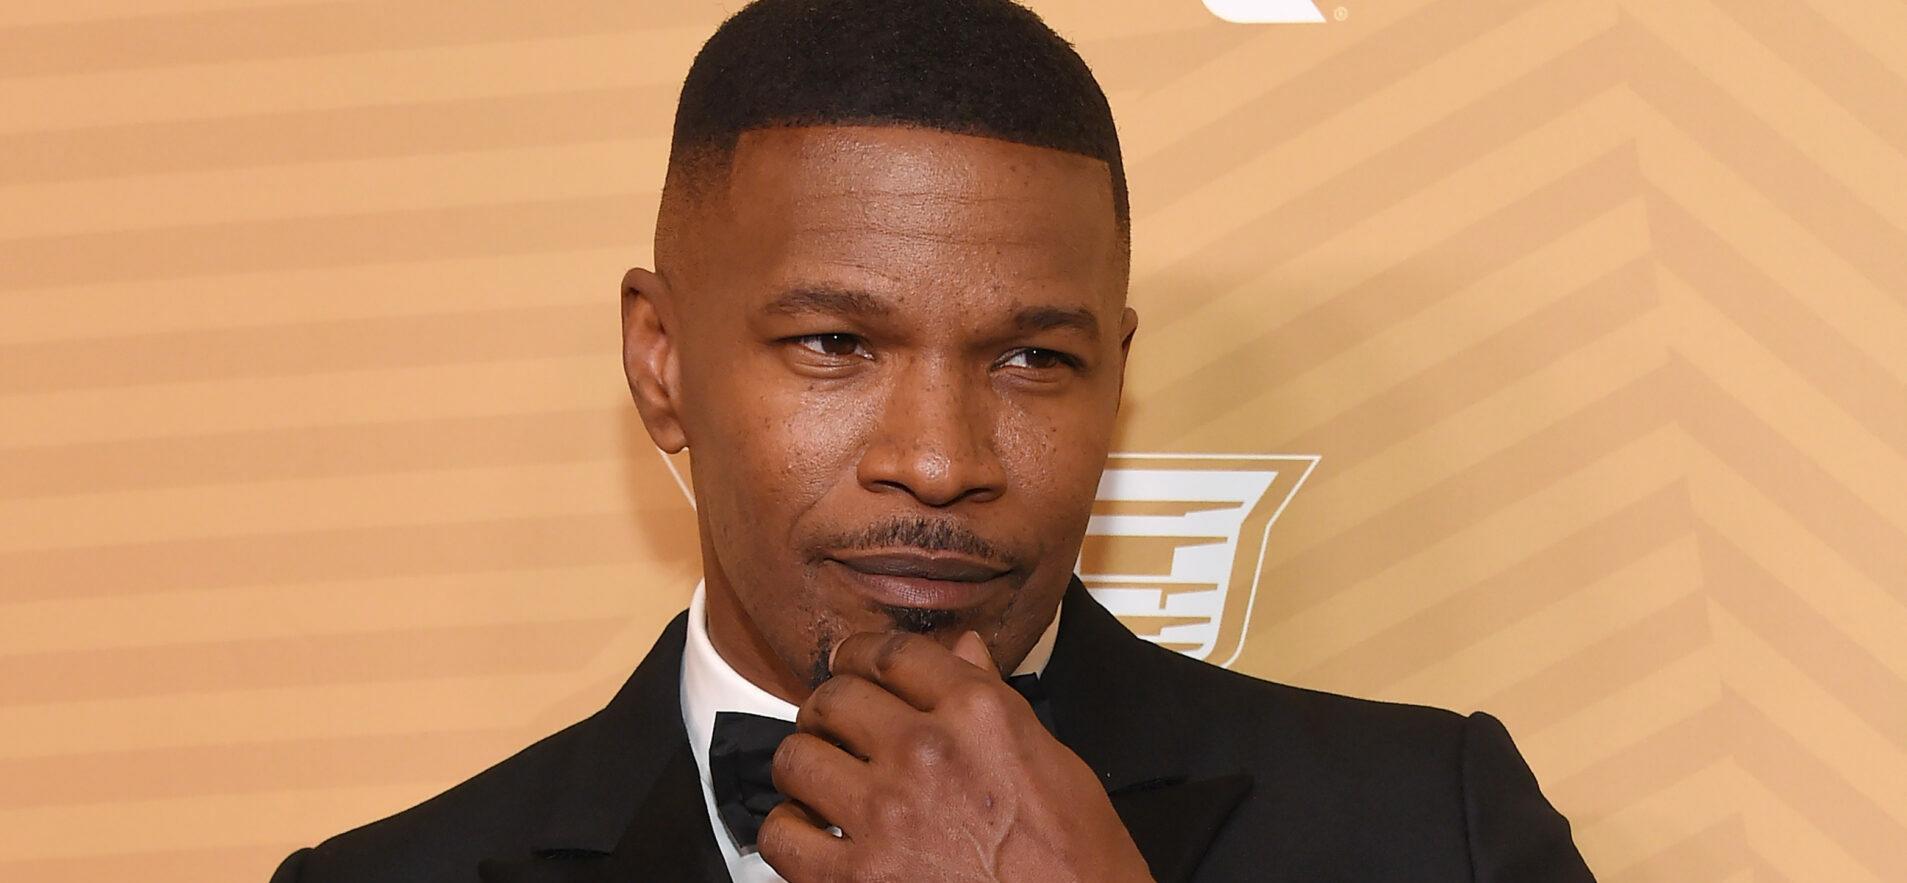 Jamie Foxx Set To Play God In Comedy Film ‘Not Another Church Movie’ Opposite Micky Rourke As The Devil